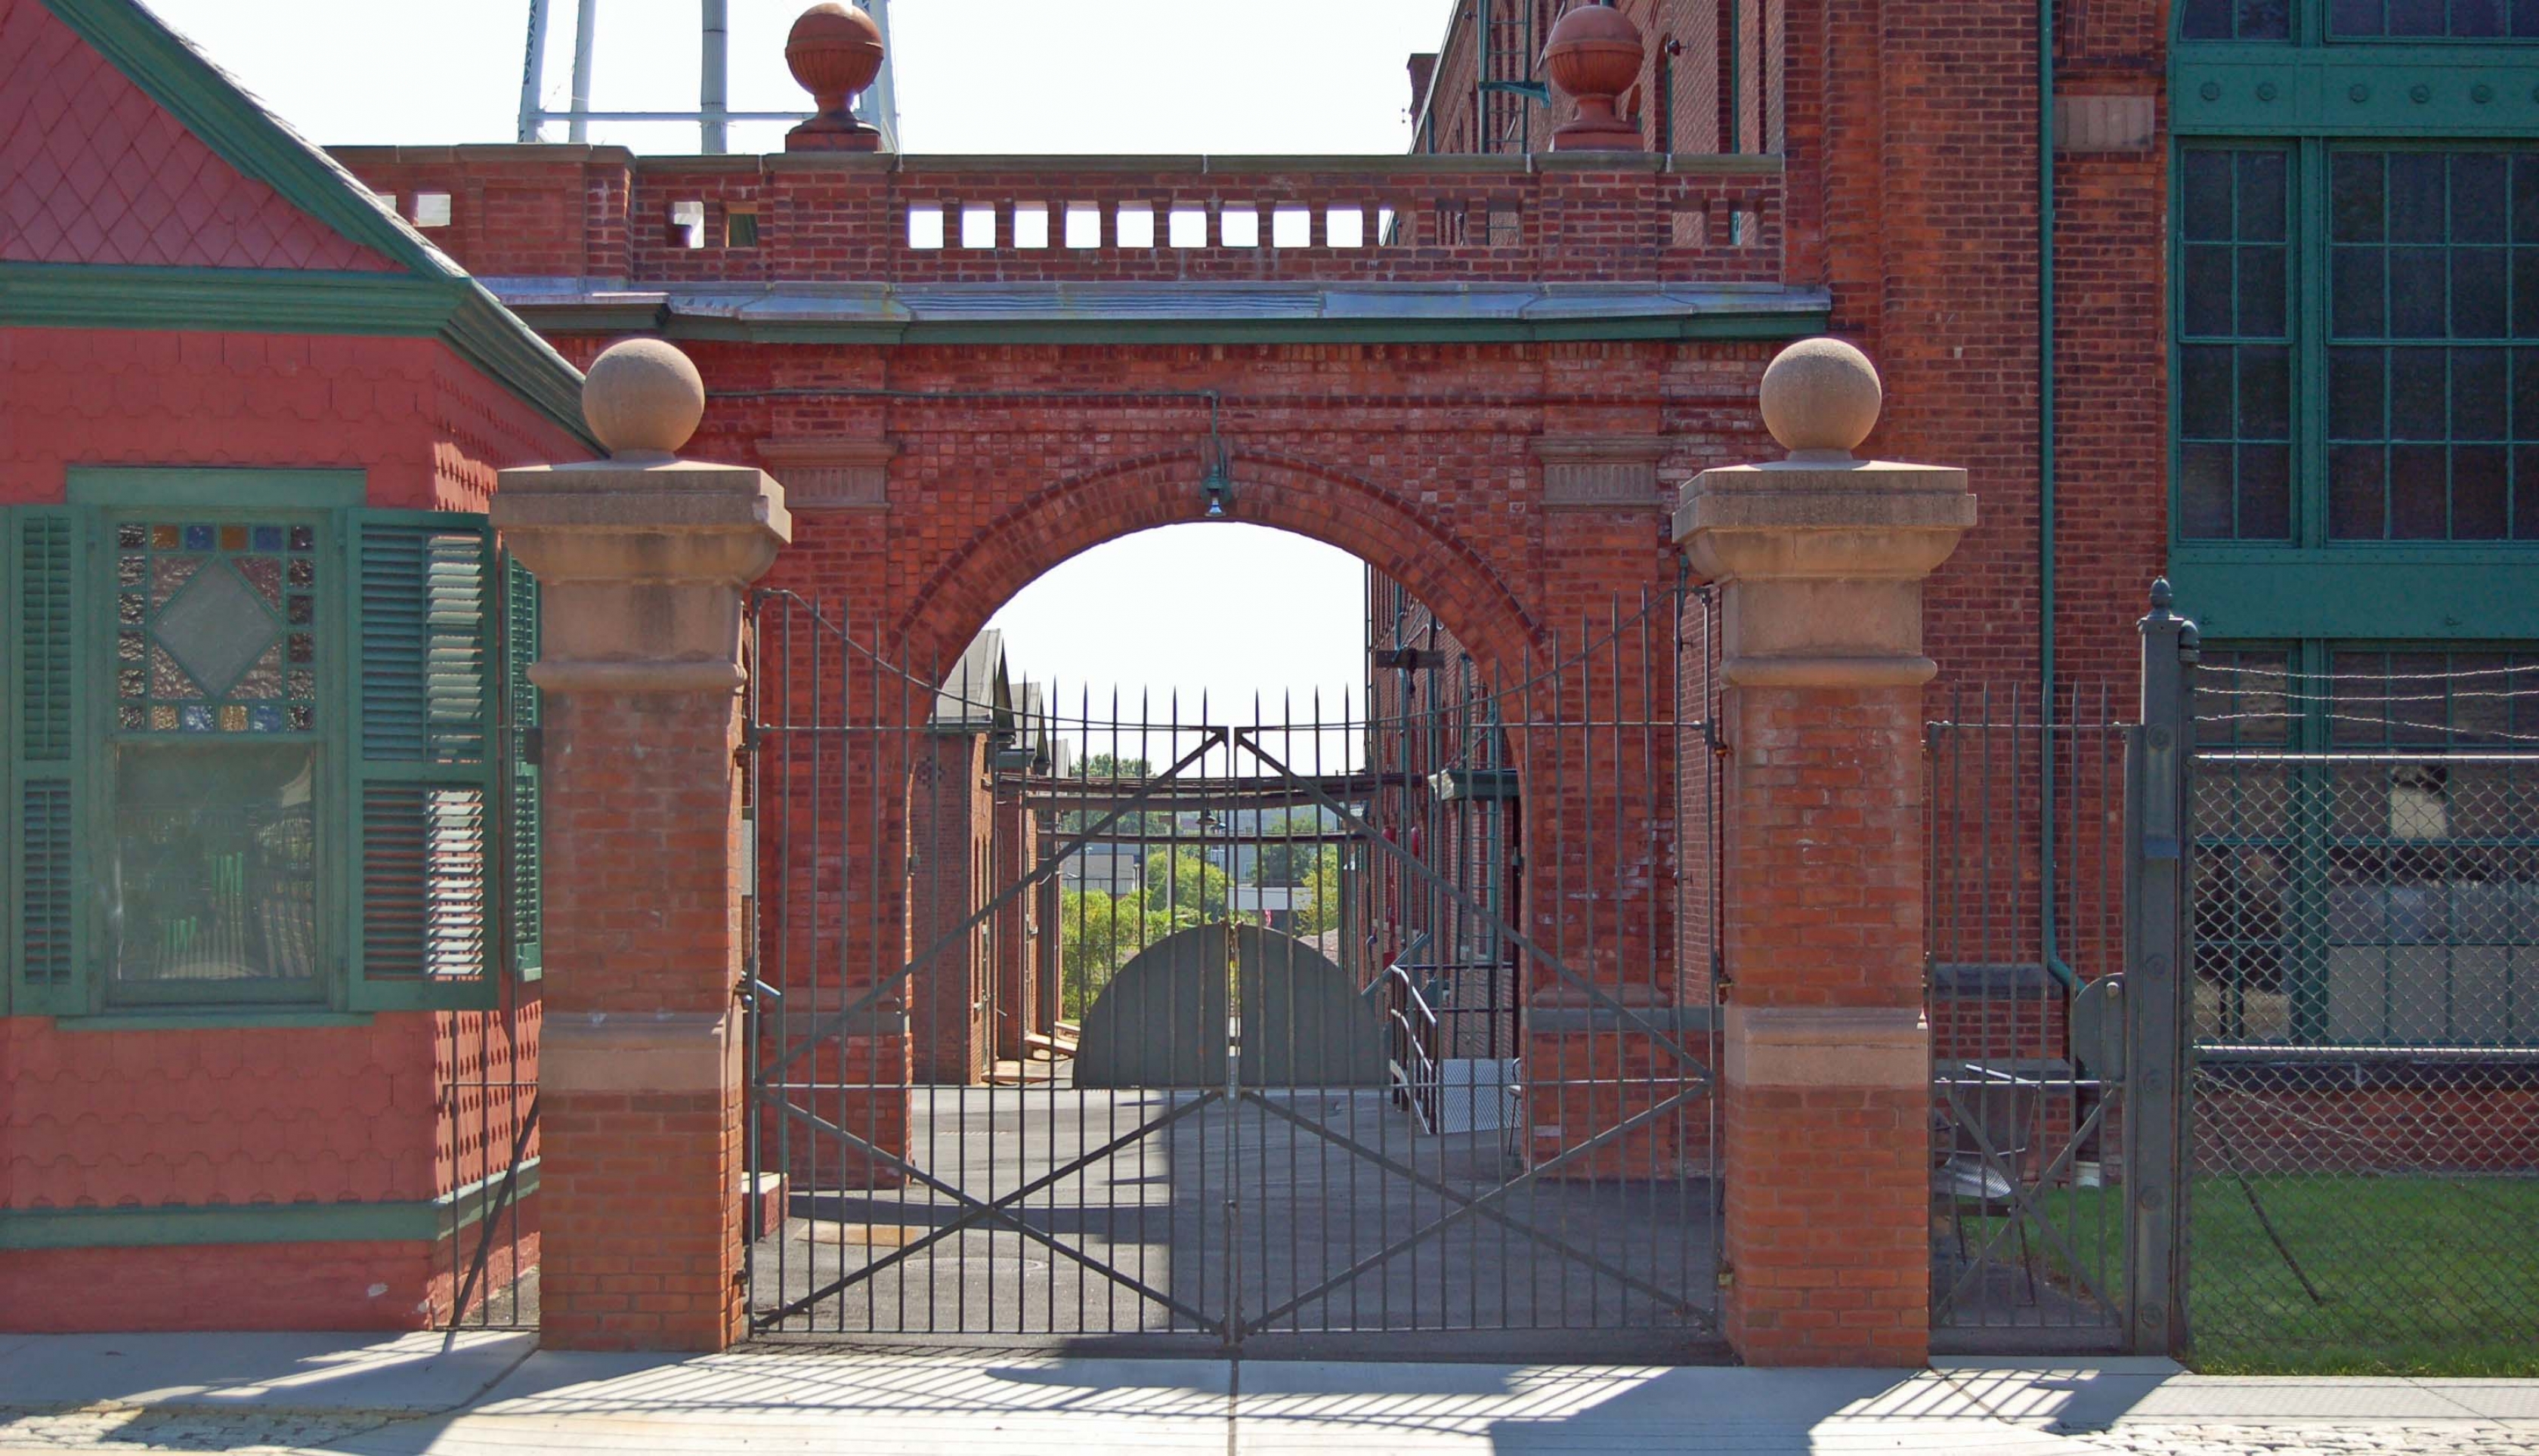 Metal gate entrance fo a red brick and green-windowed building at the Thomas Edison National Historical Park